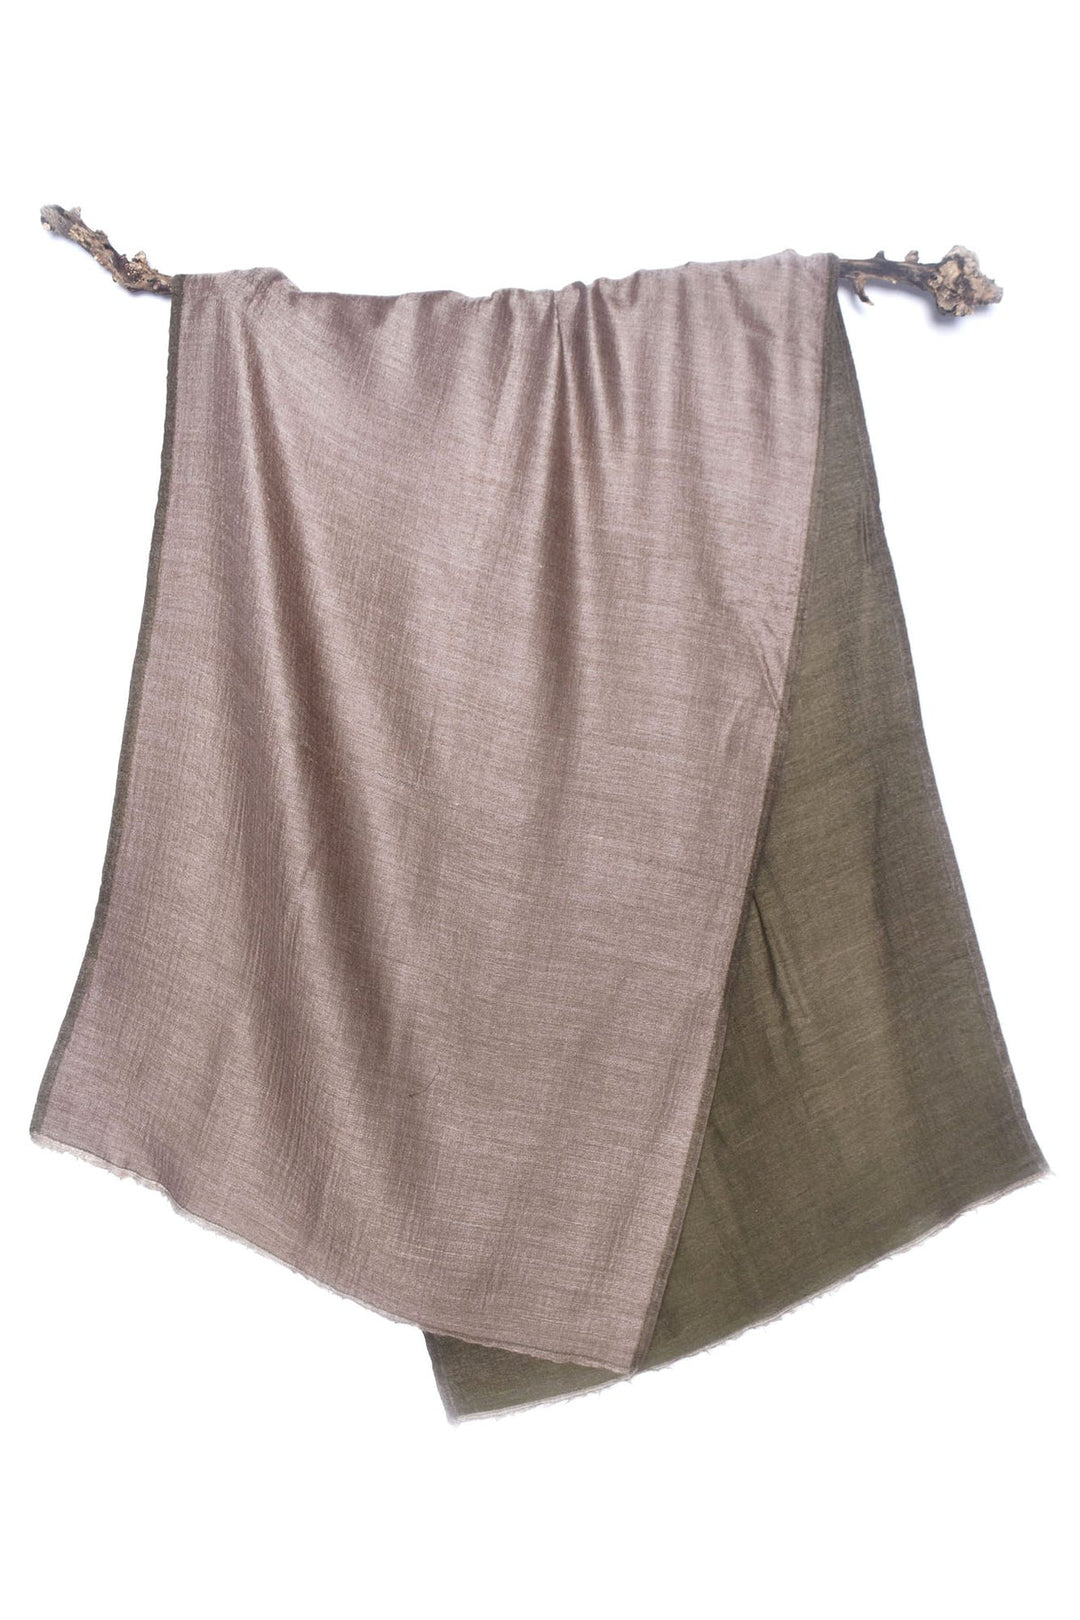 Soft Cashmere Reversible Stole - Brown/Green | Harper Soft Cashmere Stole - Brown & Green